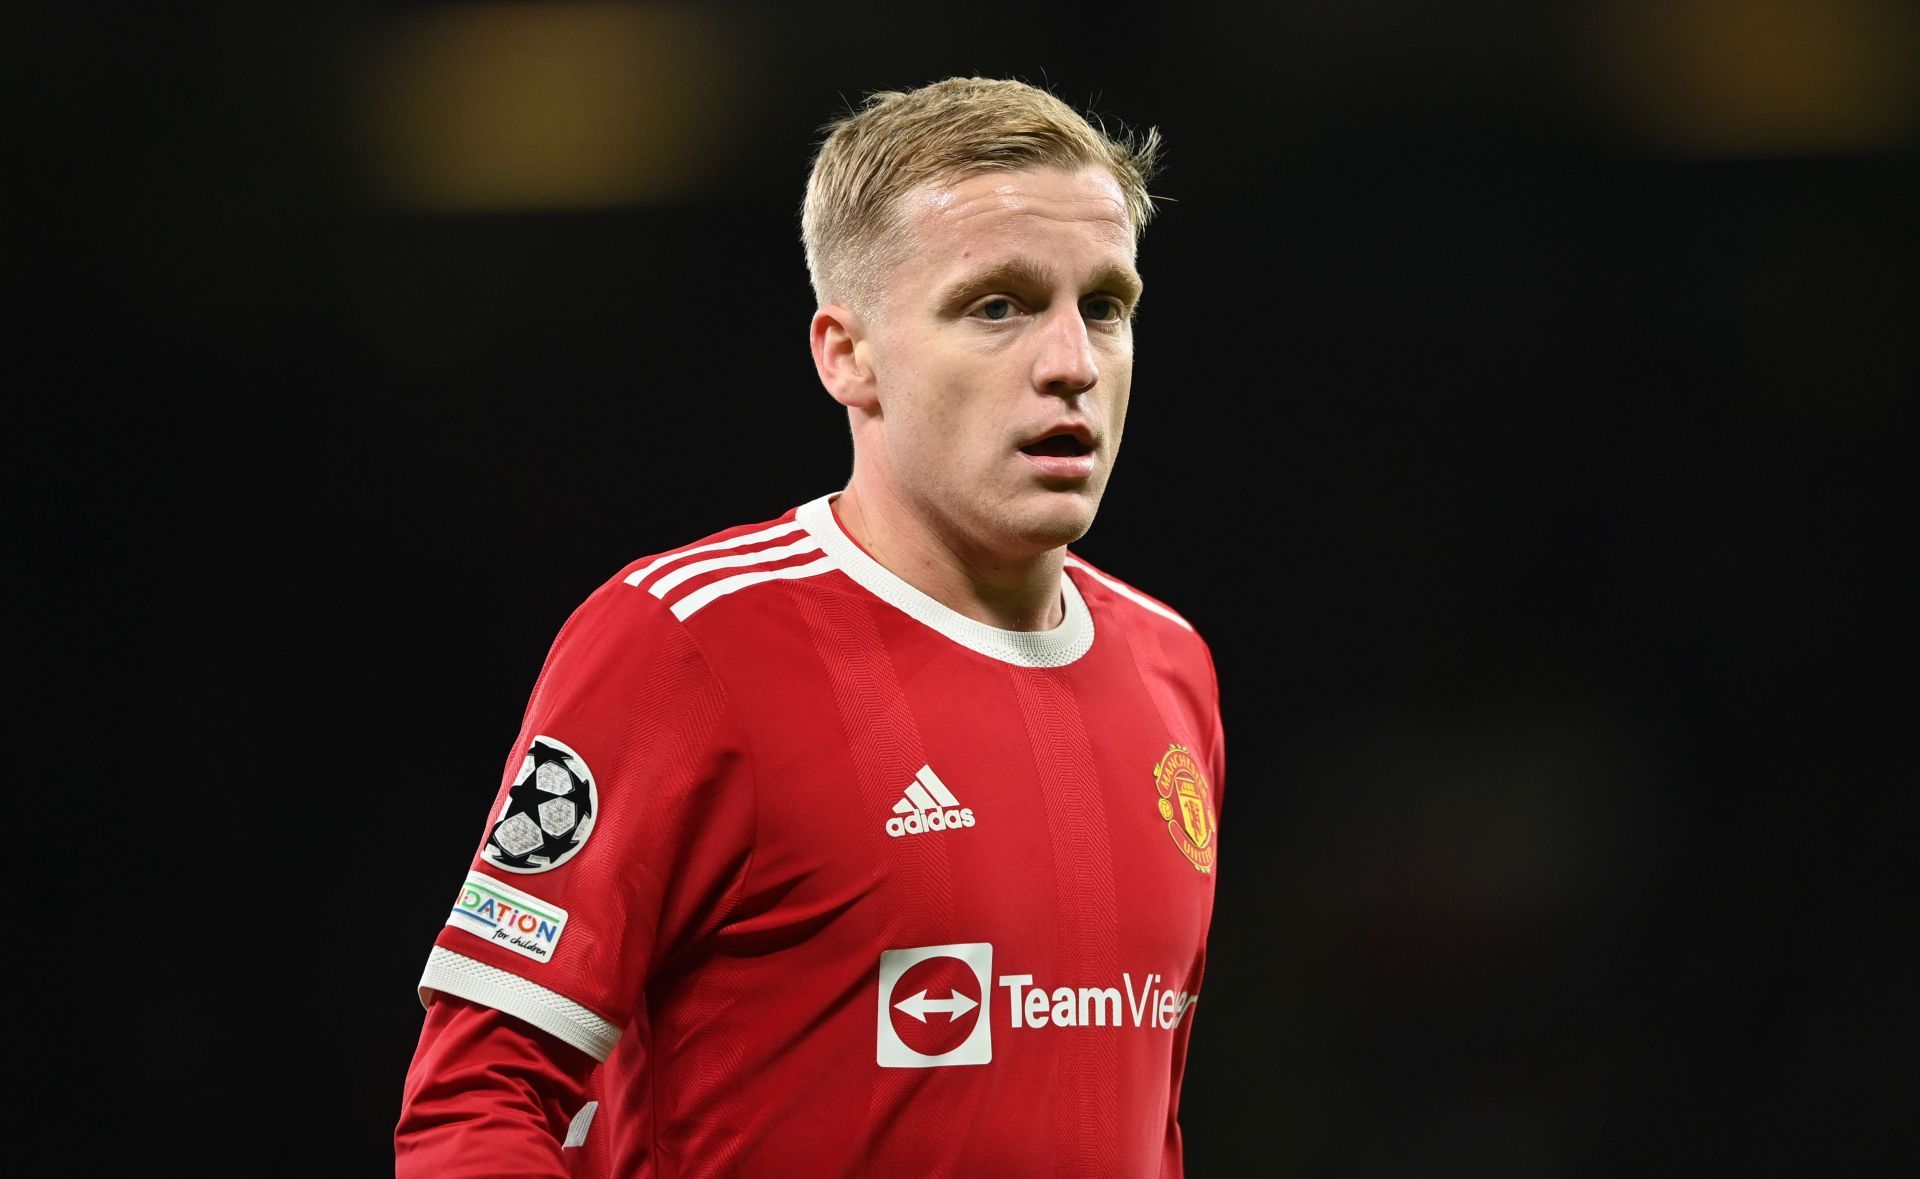 Donny Van de Beek will look to make the most out of his loan spell.